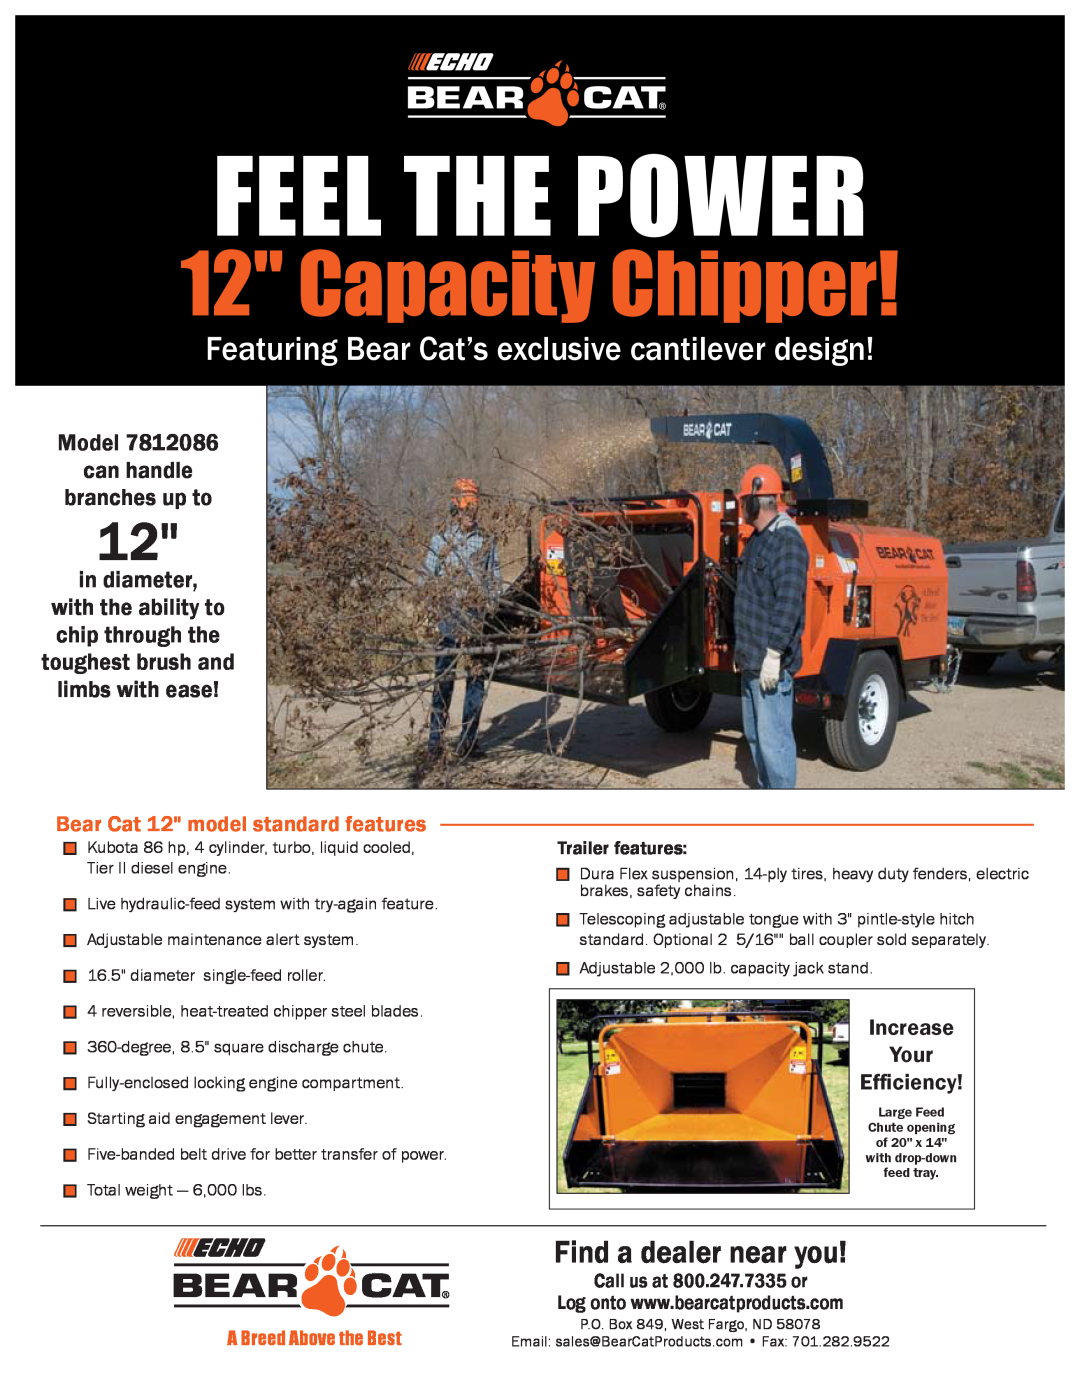 Echo 7812086 manual Featuring Bear Cat’s exclusive cantilever design, Feel the power, Capacity Chipper, in diameter 